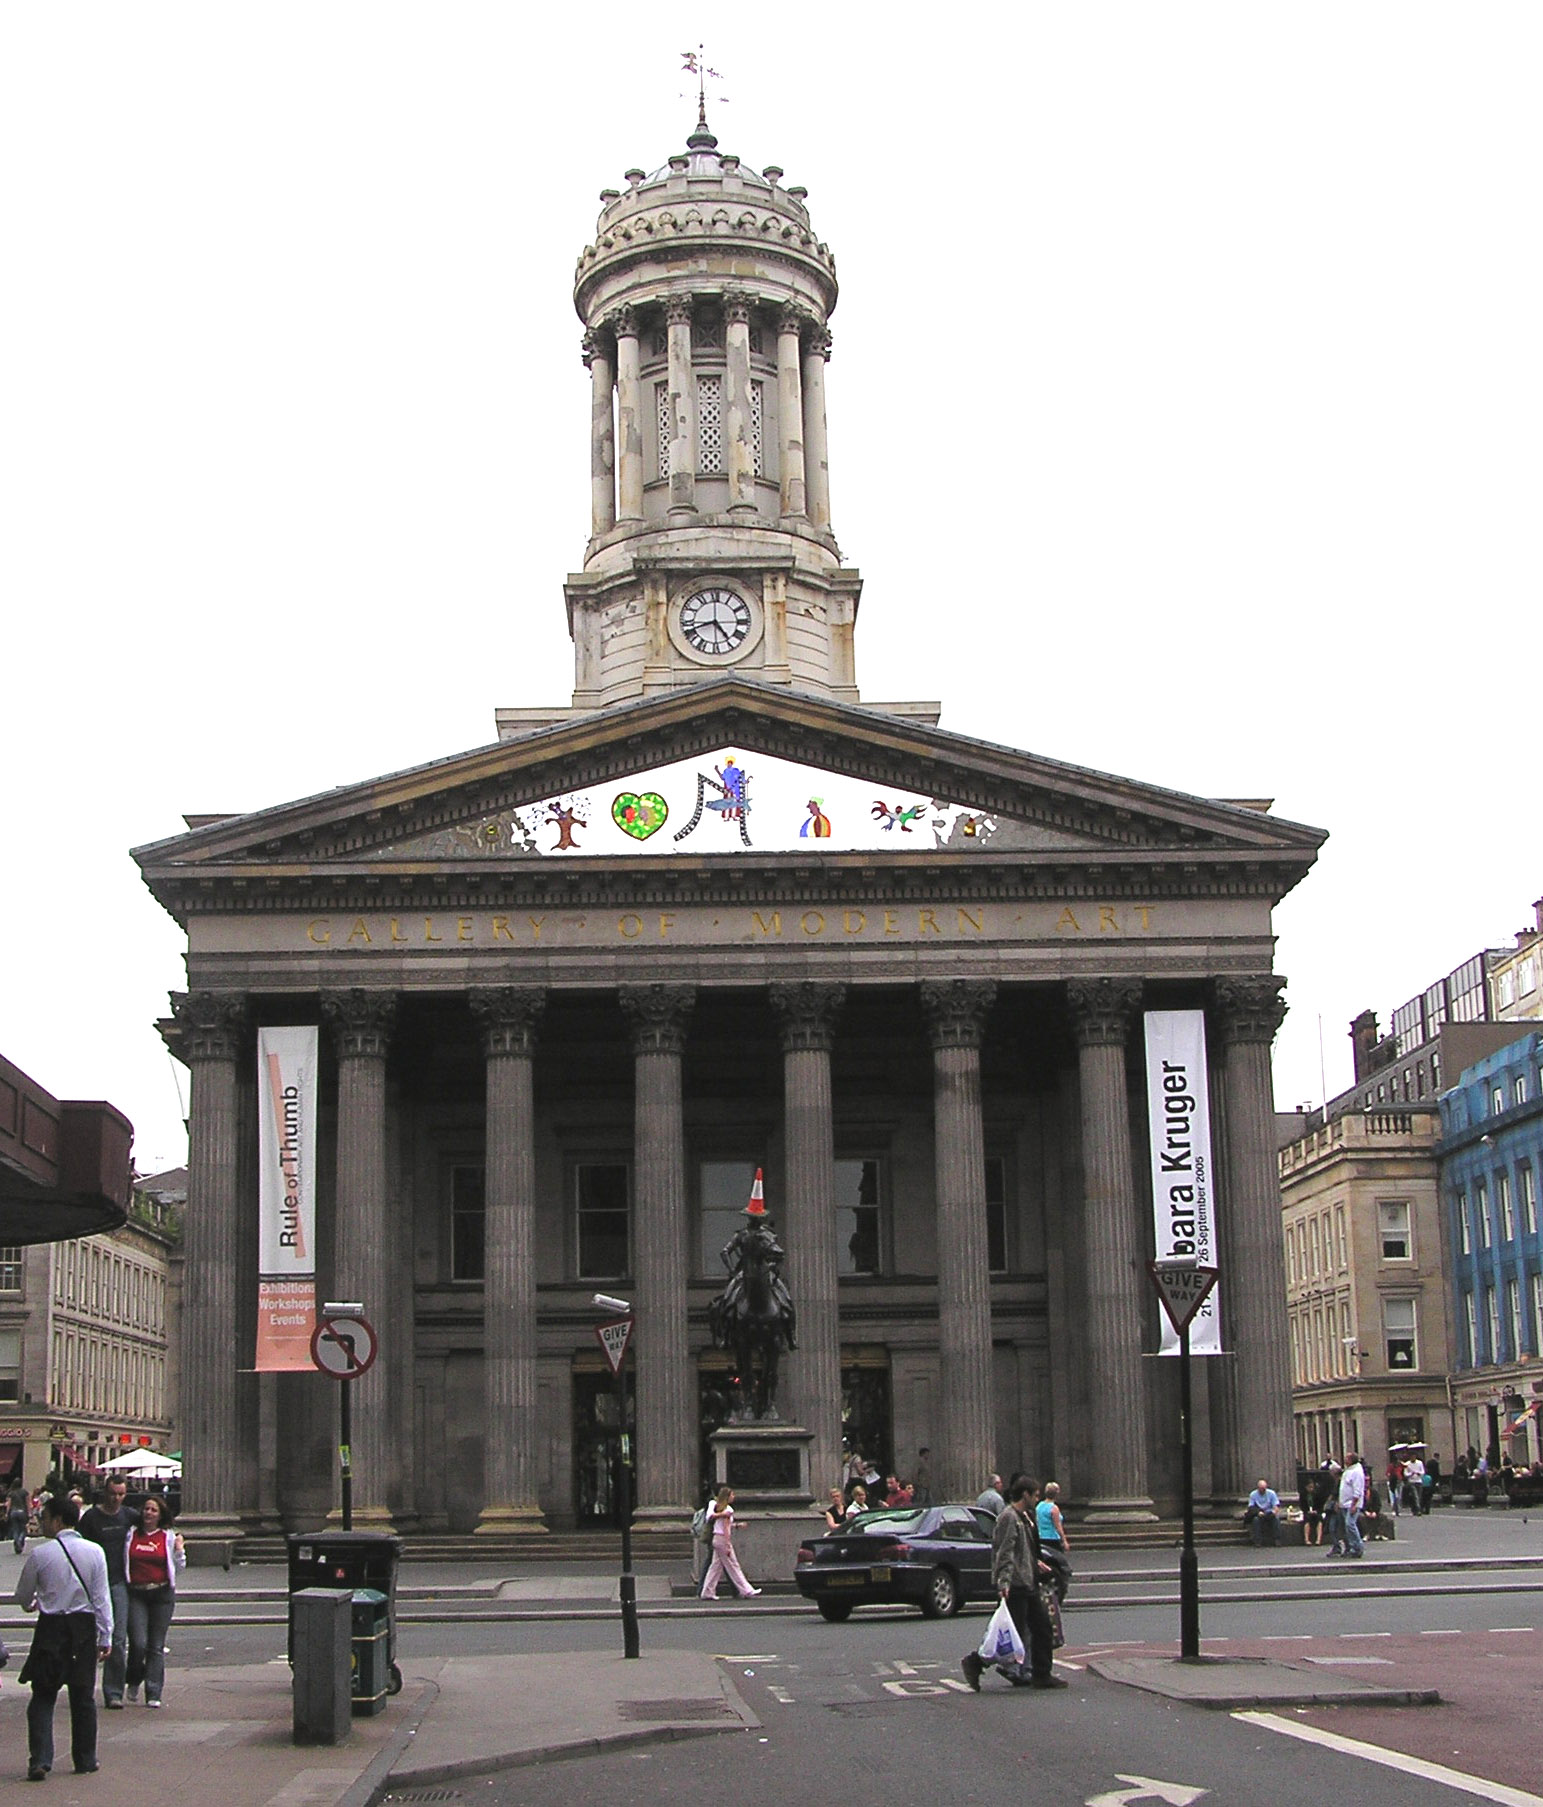 Glasgow's Gallery of Modern Art, along with the famous statue of the Duke of Wellington perpetually defaced by a traffic cone placed atop his head 